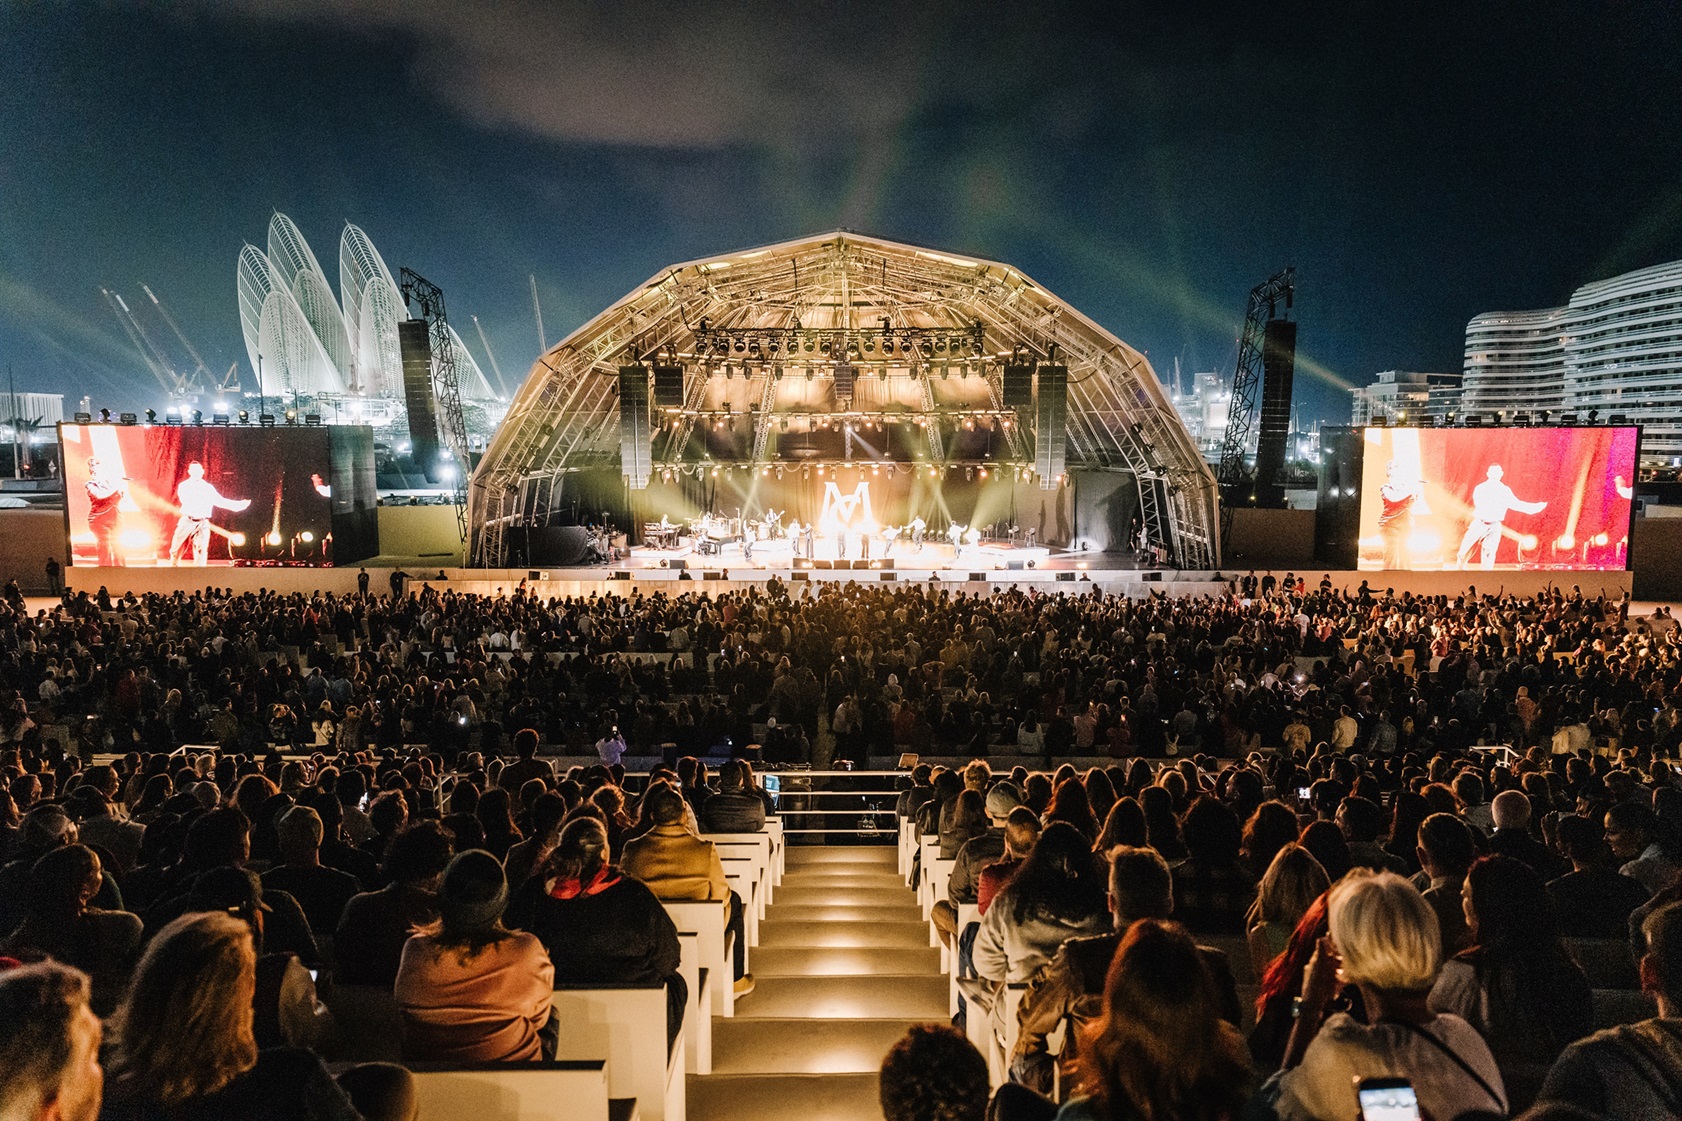 the three month Saadiyat Nights concert series has been carefully curated to bring together a diverse lineup of artists ensuring an array of captivating experiences over the c